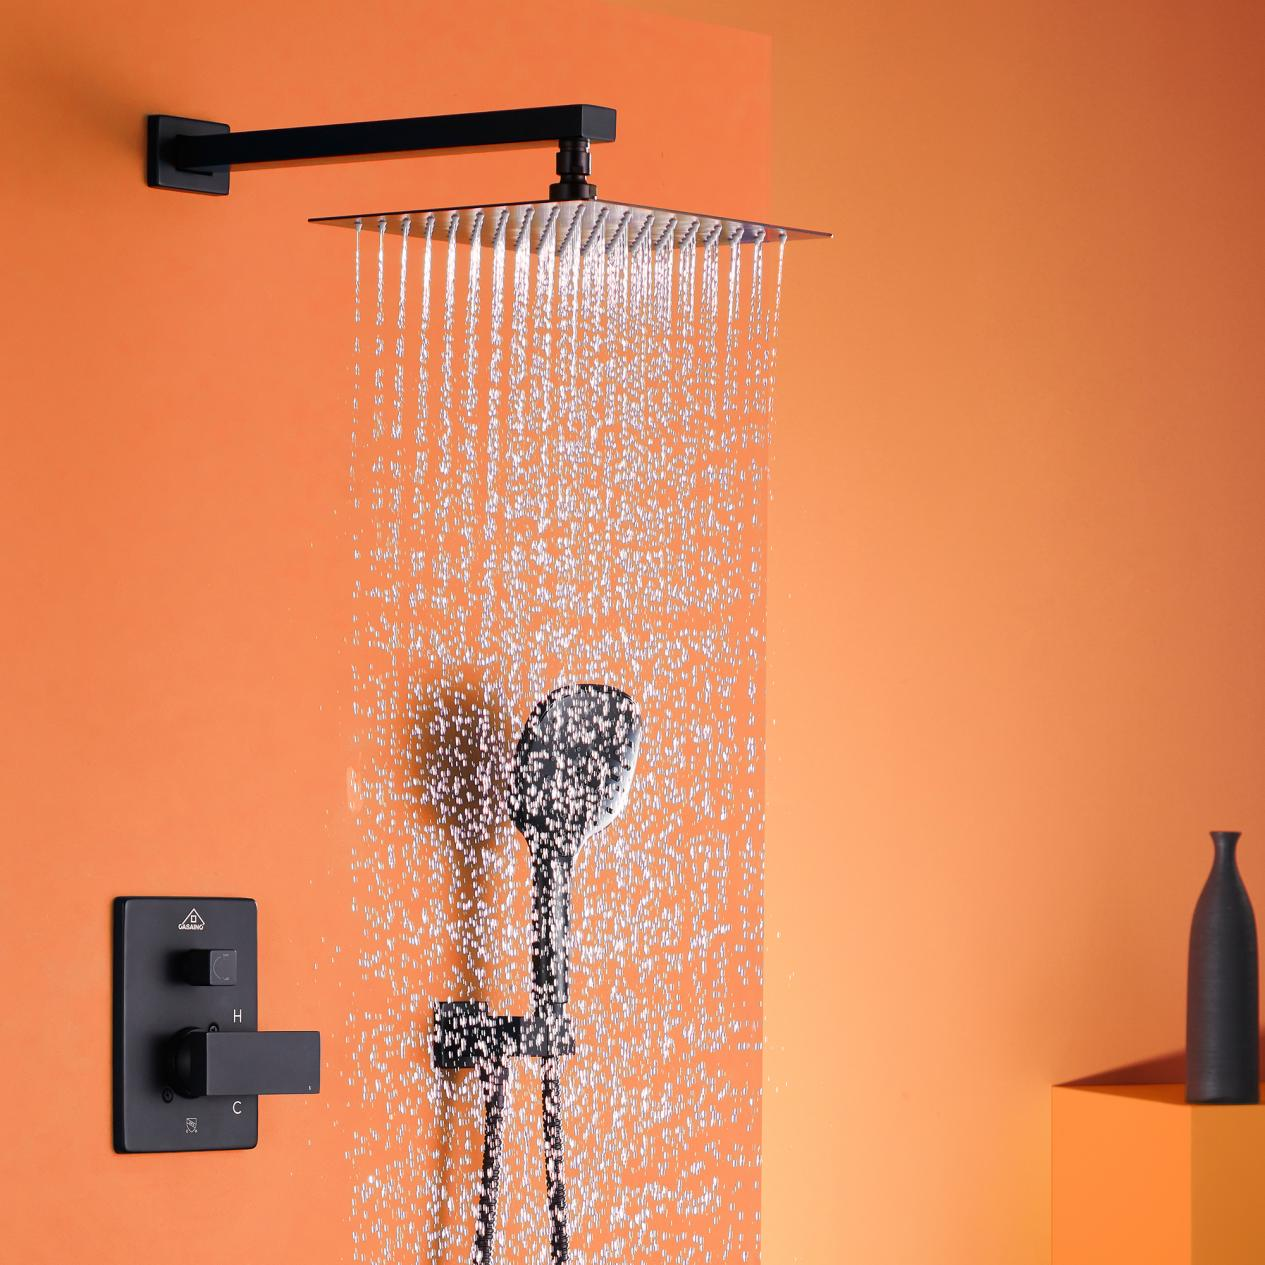 Brushed Gold Rain Shower System: a Classic Rain Shower Systems for Luxurious Bathroom